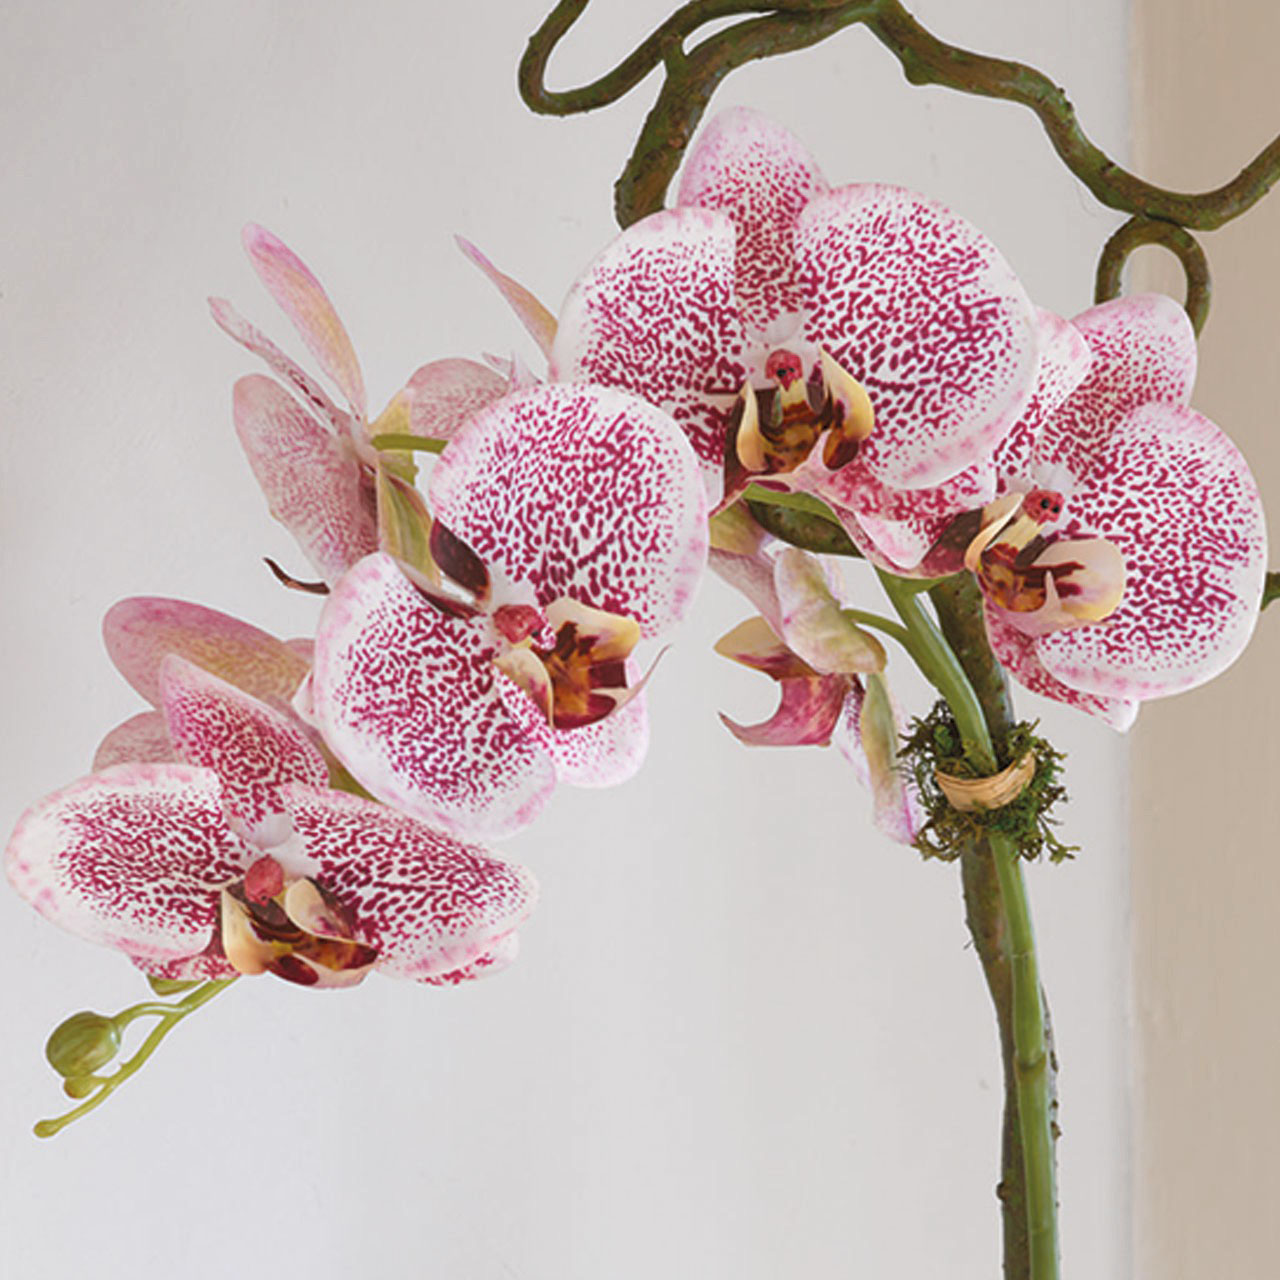 Lusong Pink Orchid - Limited Edition